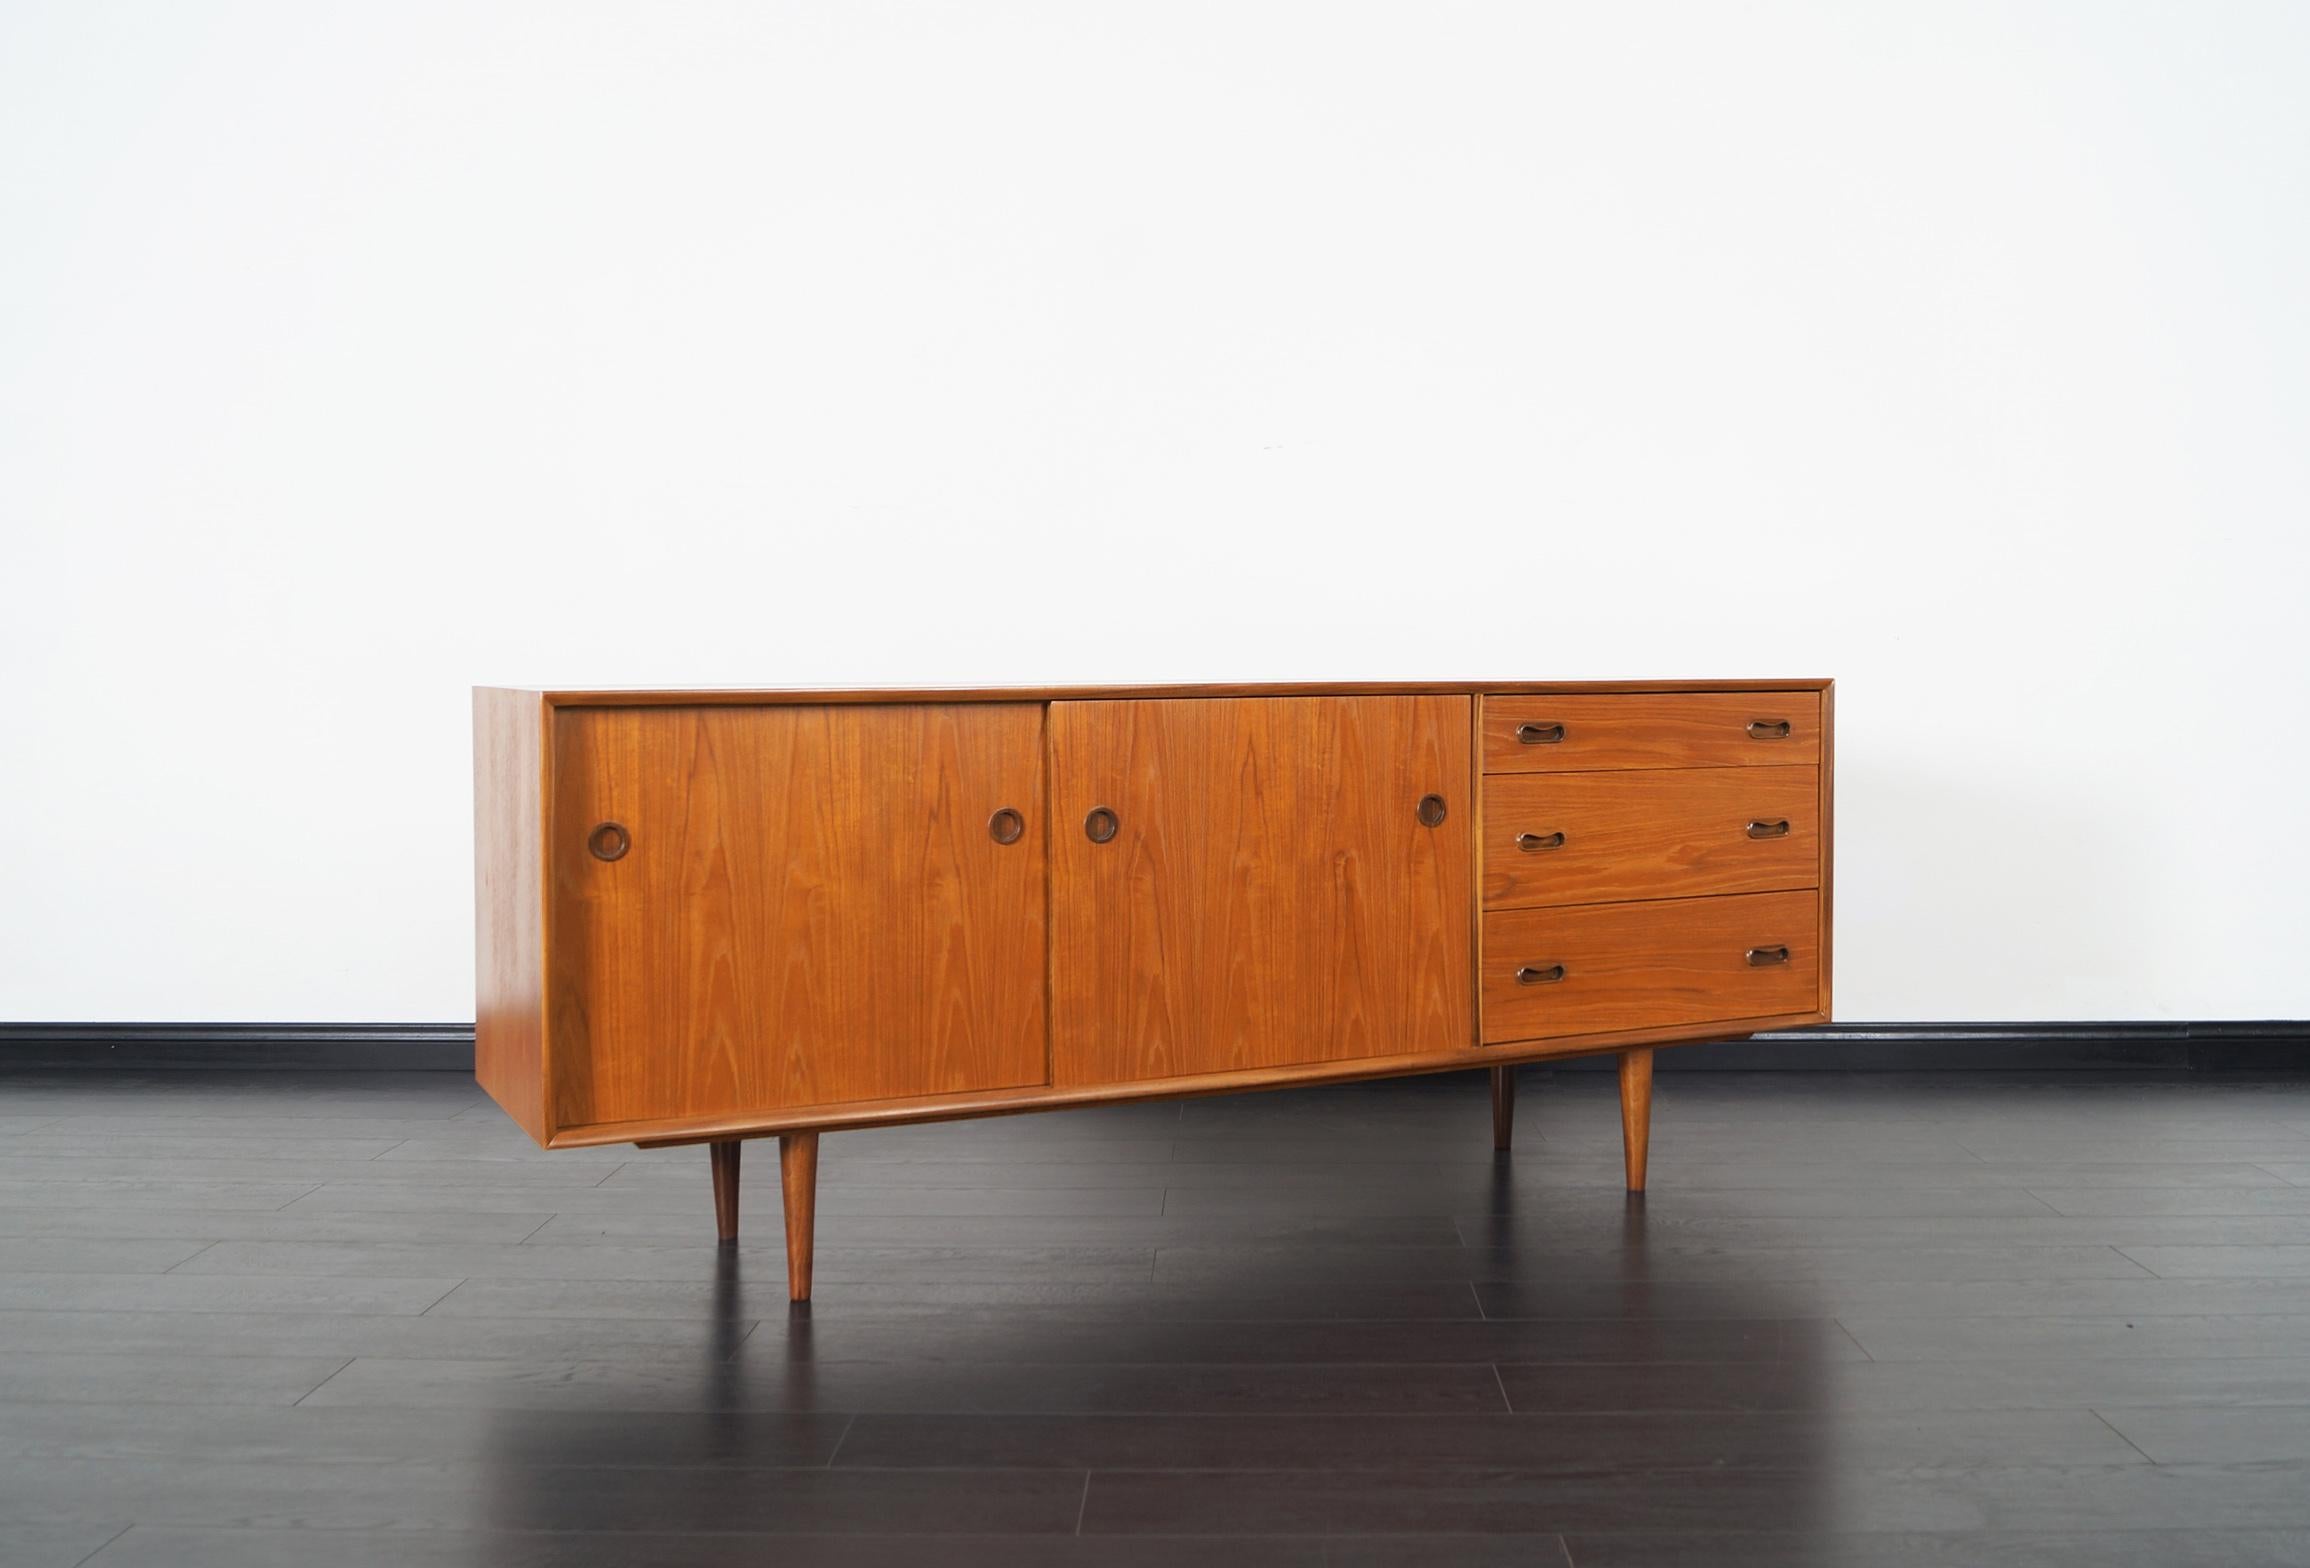 Danish modern teak sideboard features two sliding doors and three pullout / pull-out drawers.